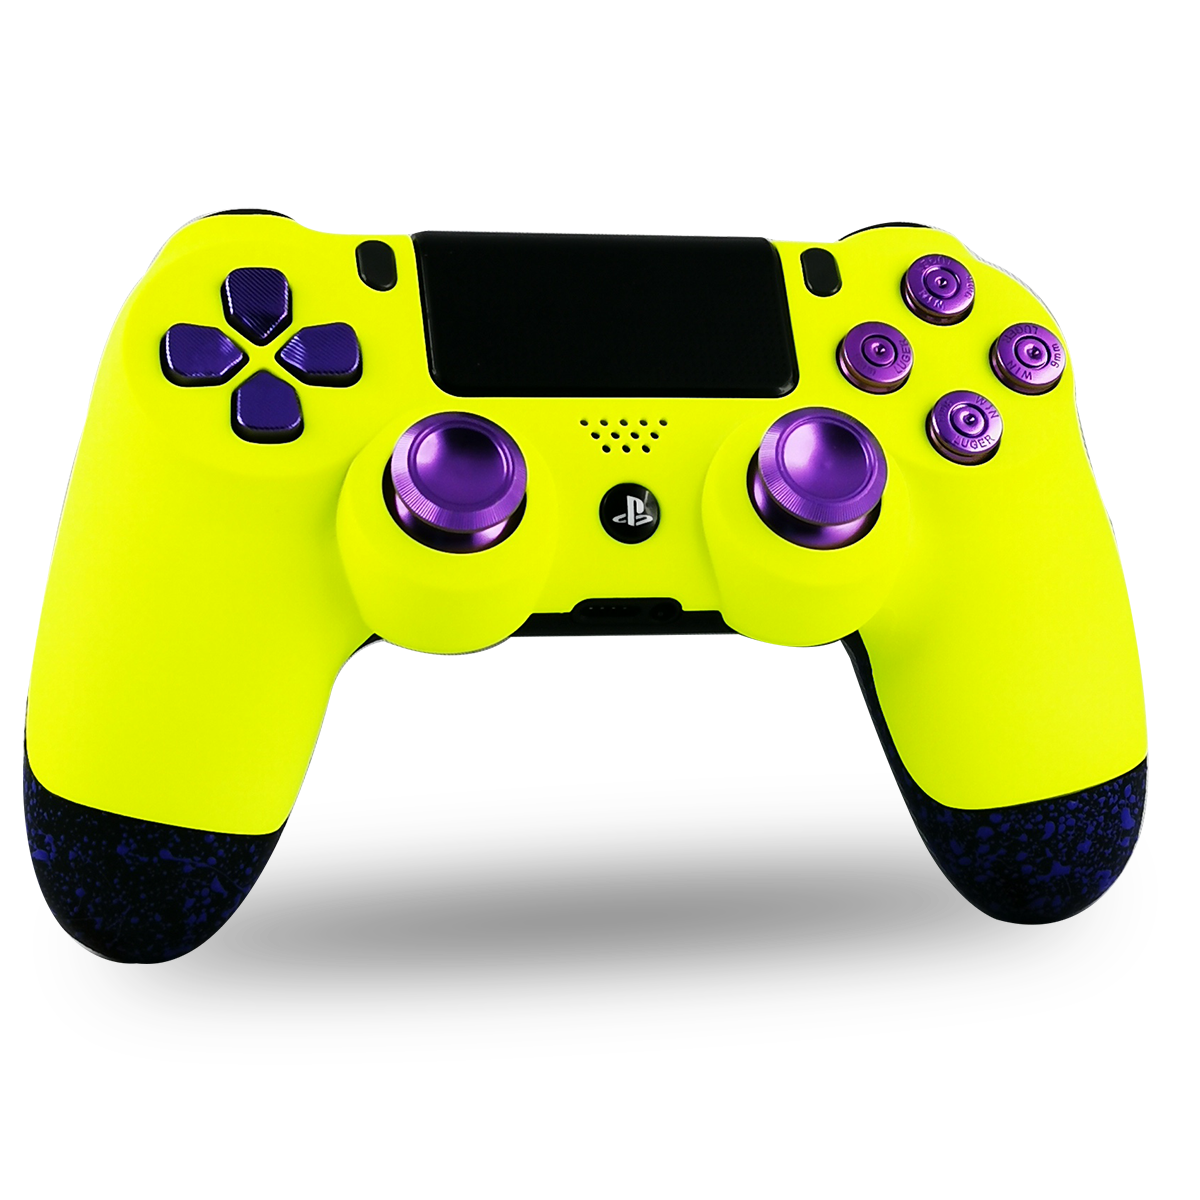 manette-PS4-custom-playstation-4-sony-personnalisee-drawmypad-inconnu16